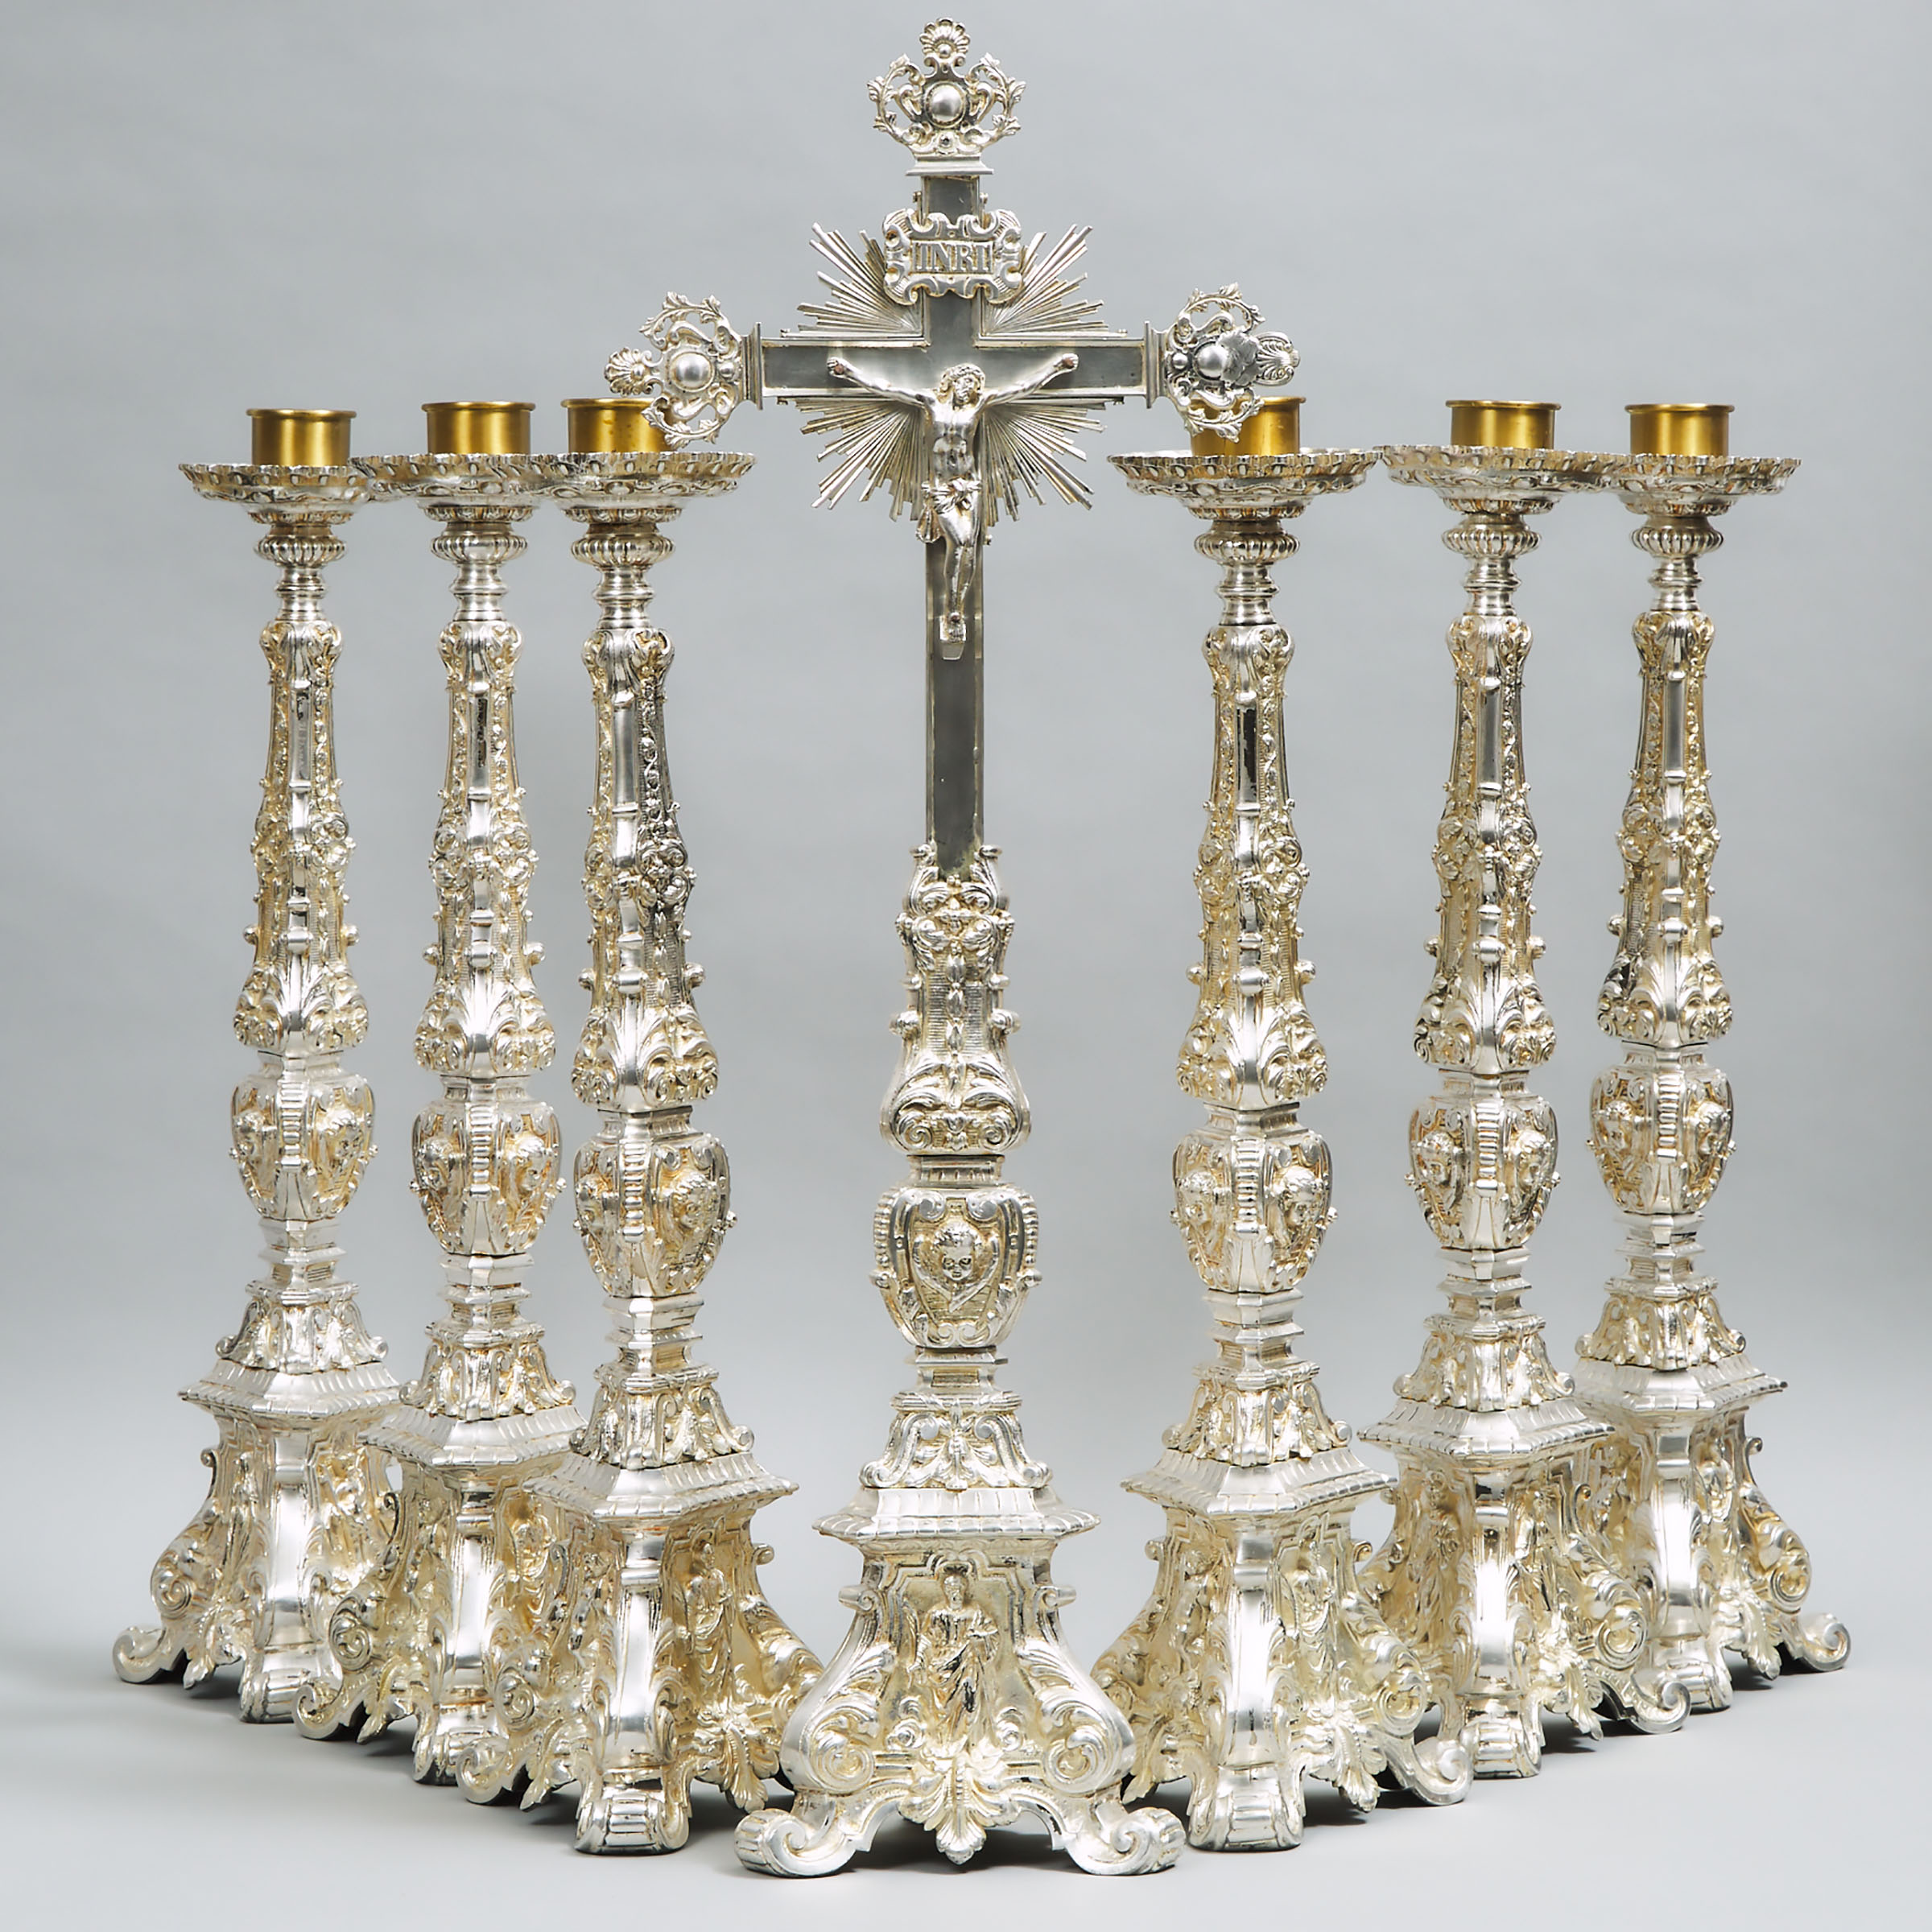 French Seven Piece Silvered Bronze Ecclesiastical Altar Garniture, early 20th century